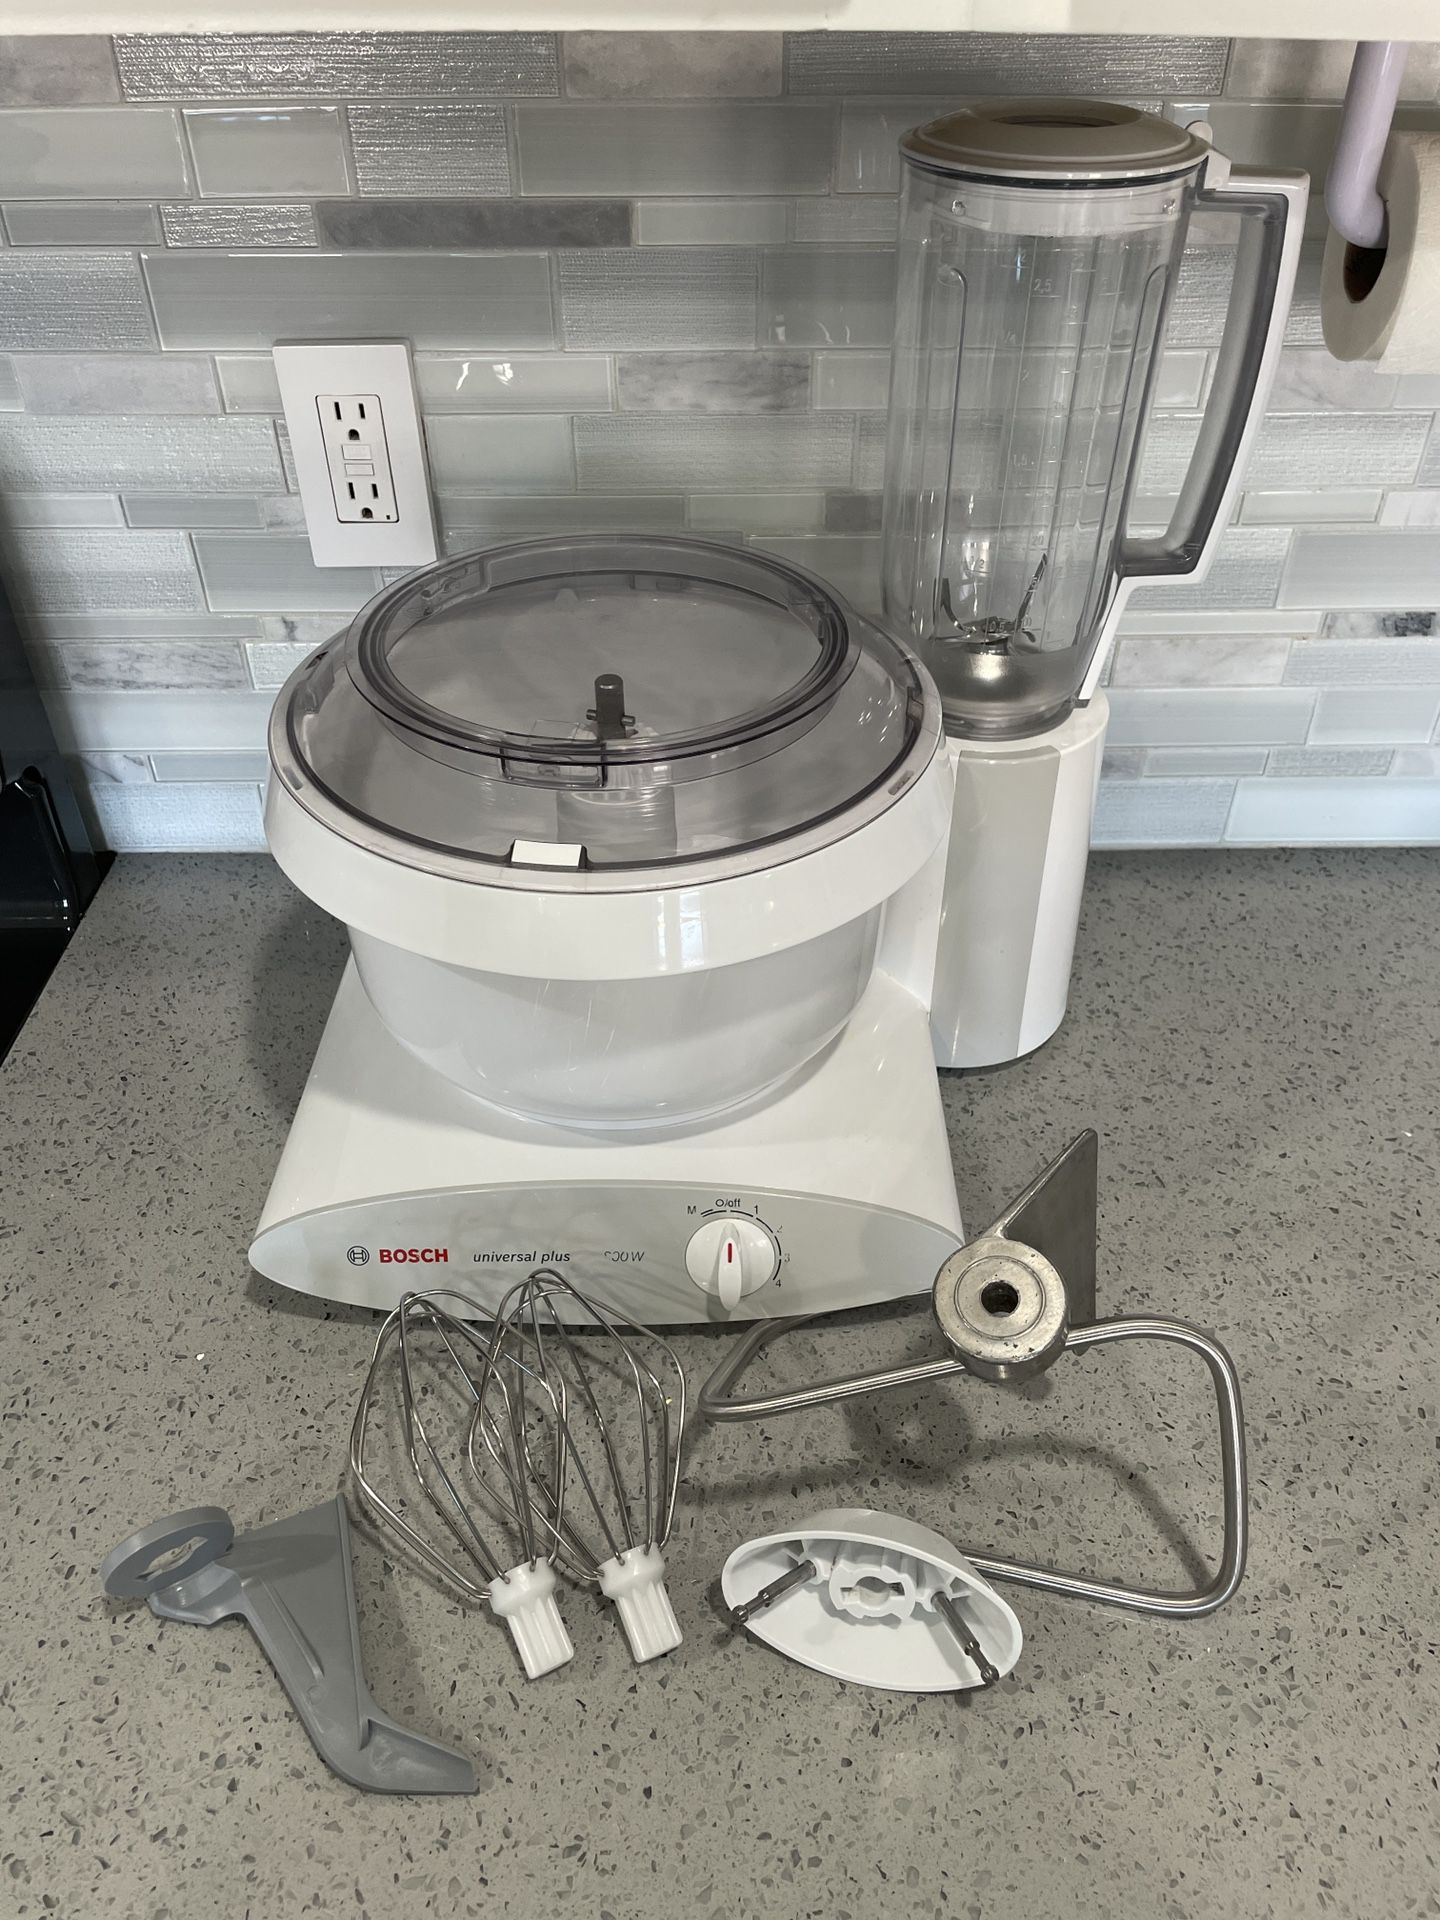 Bosch Universal Plus Mixer And Attachments for Sale in Mesa, AZ